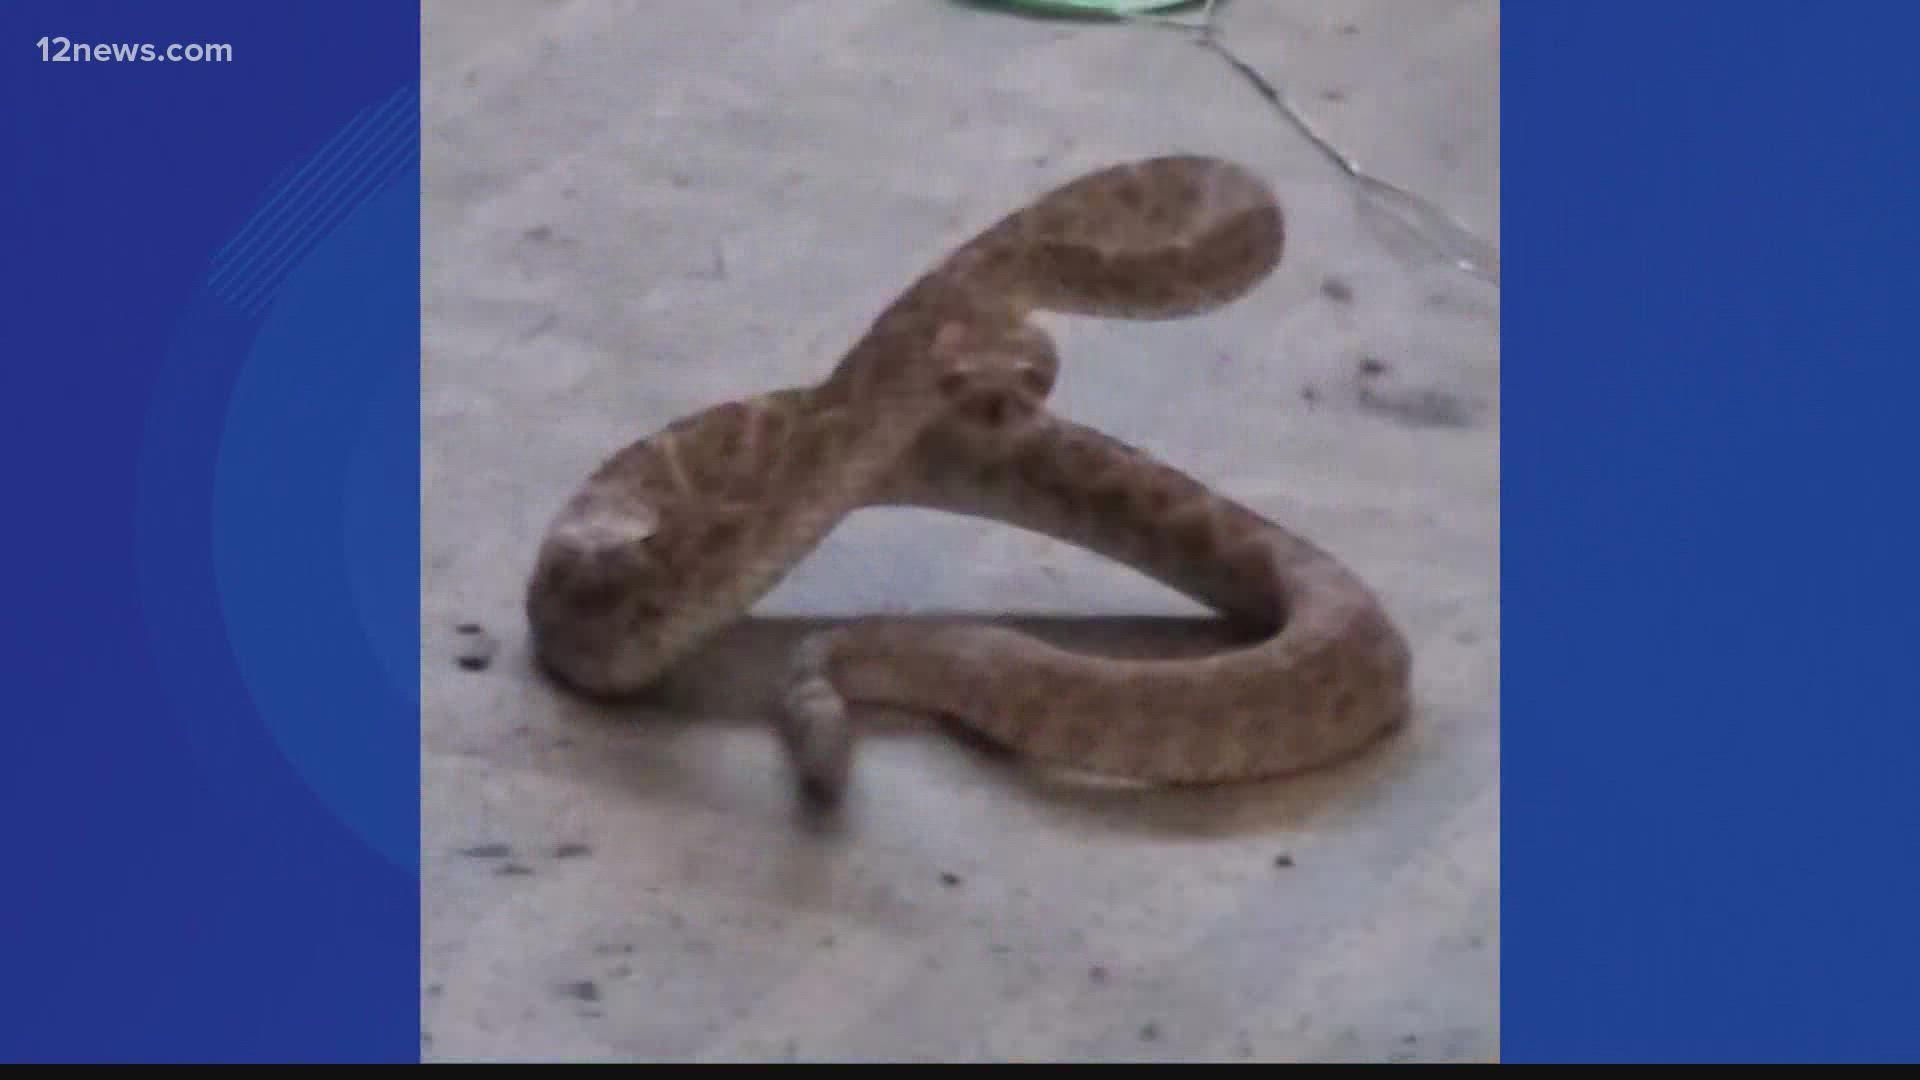 Warmer weather means the snakes are out and about. One Ahwatukee woman got the scare of a lifetime when a rattlesnake paid her an unexpected visit.